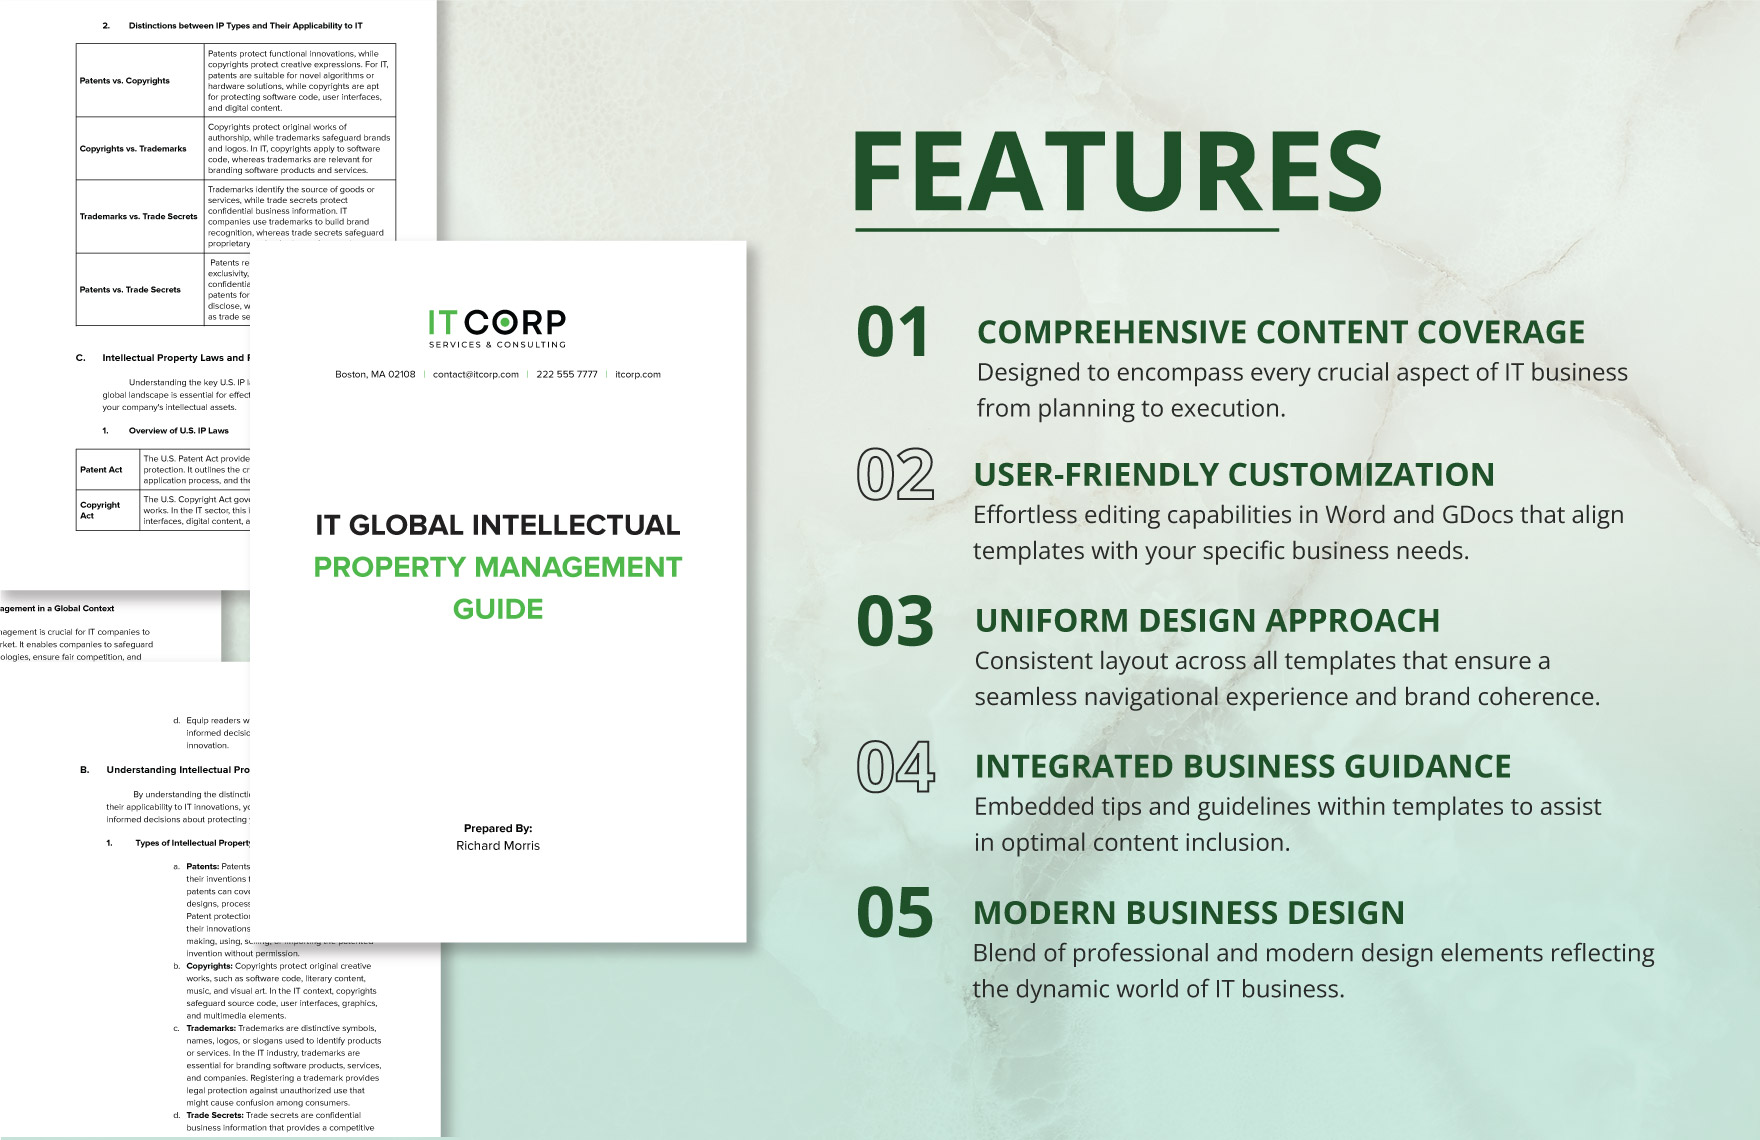 IT Global Intellectual Property Management Guide Template